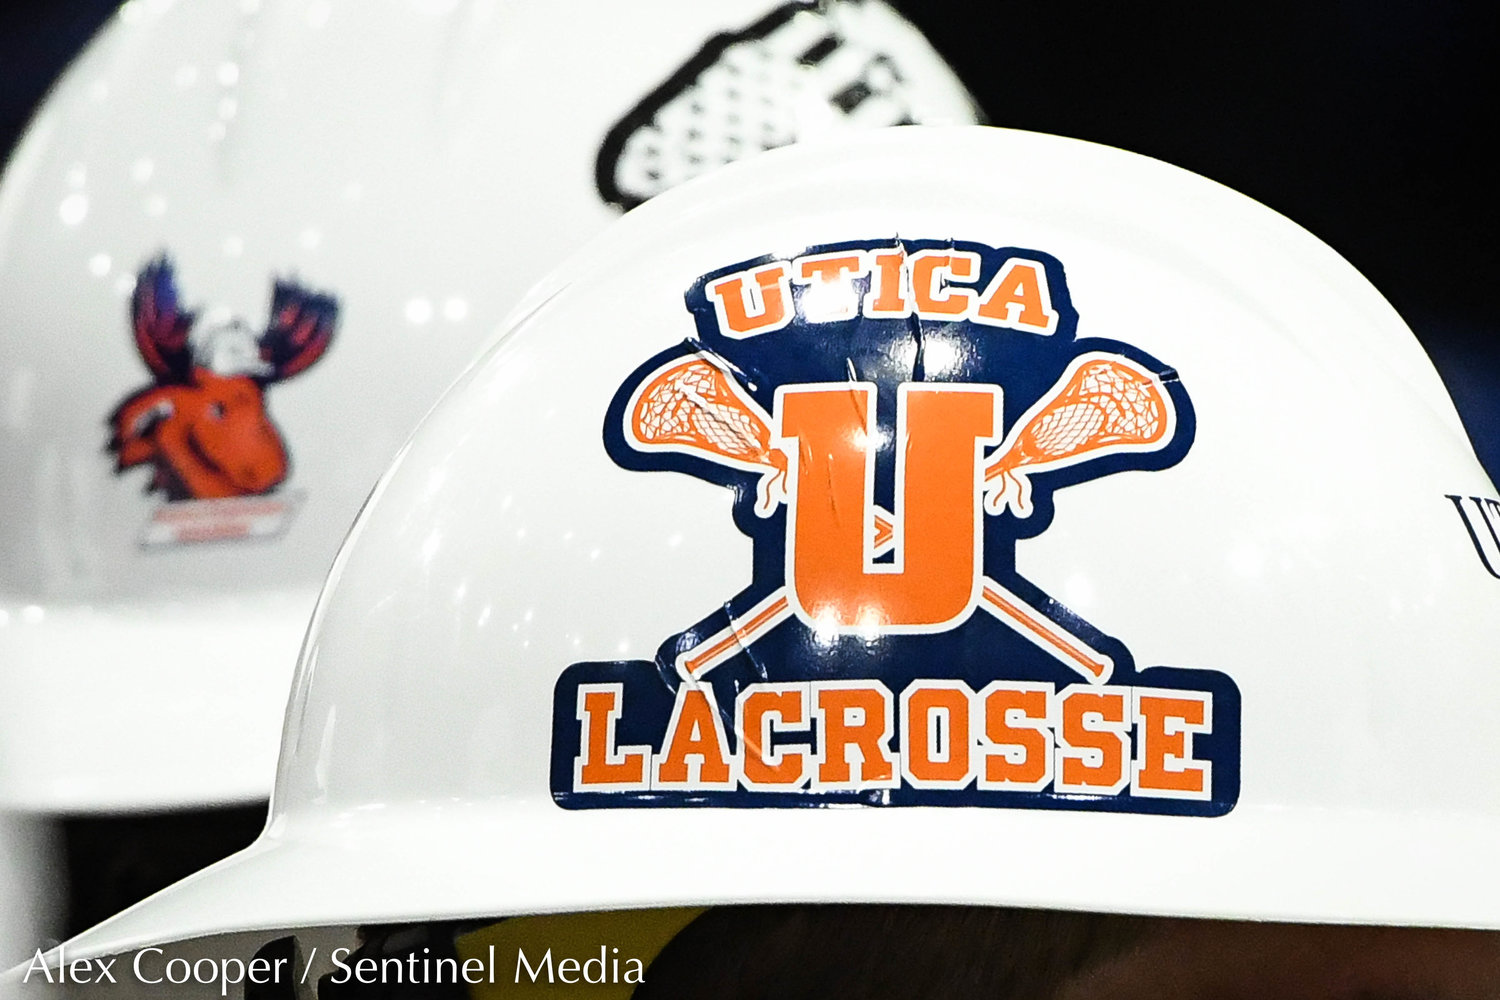 A lacrosse sticker is decorated on a safety helmet during Utica University's Undergraduate Commencement Ceremony on Thursday at the Adirondack Bank Center at the Utica Memorial Auditorium.